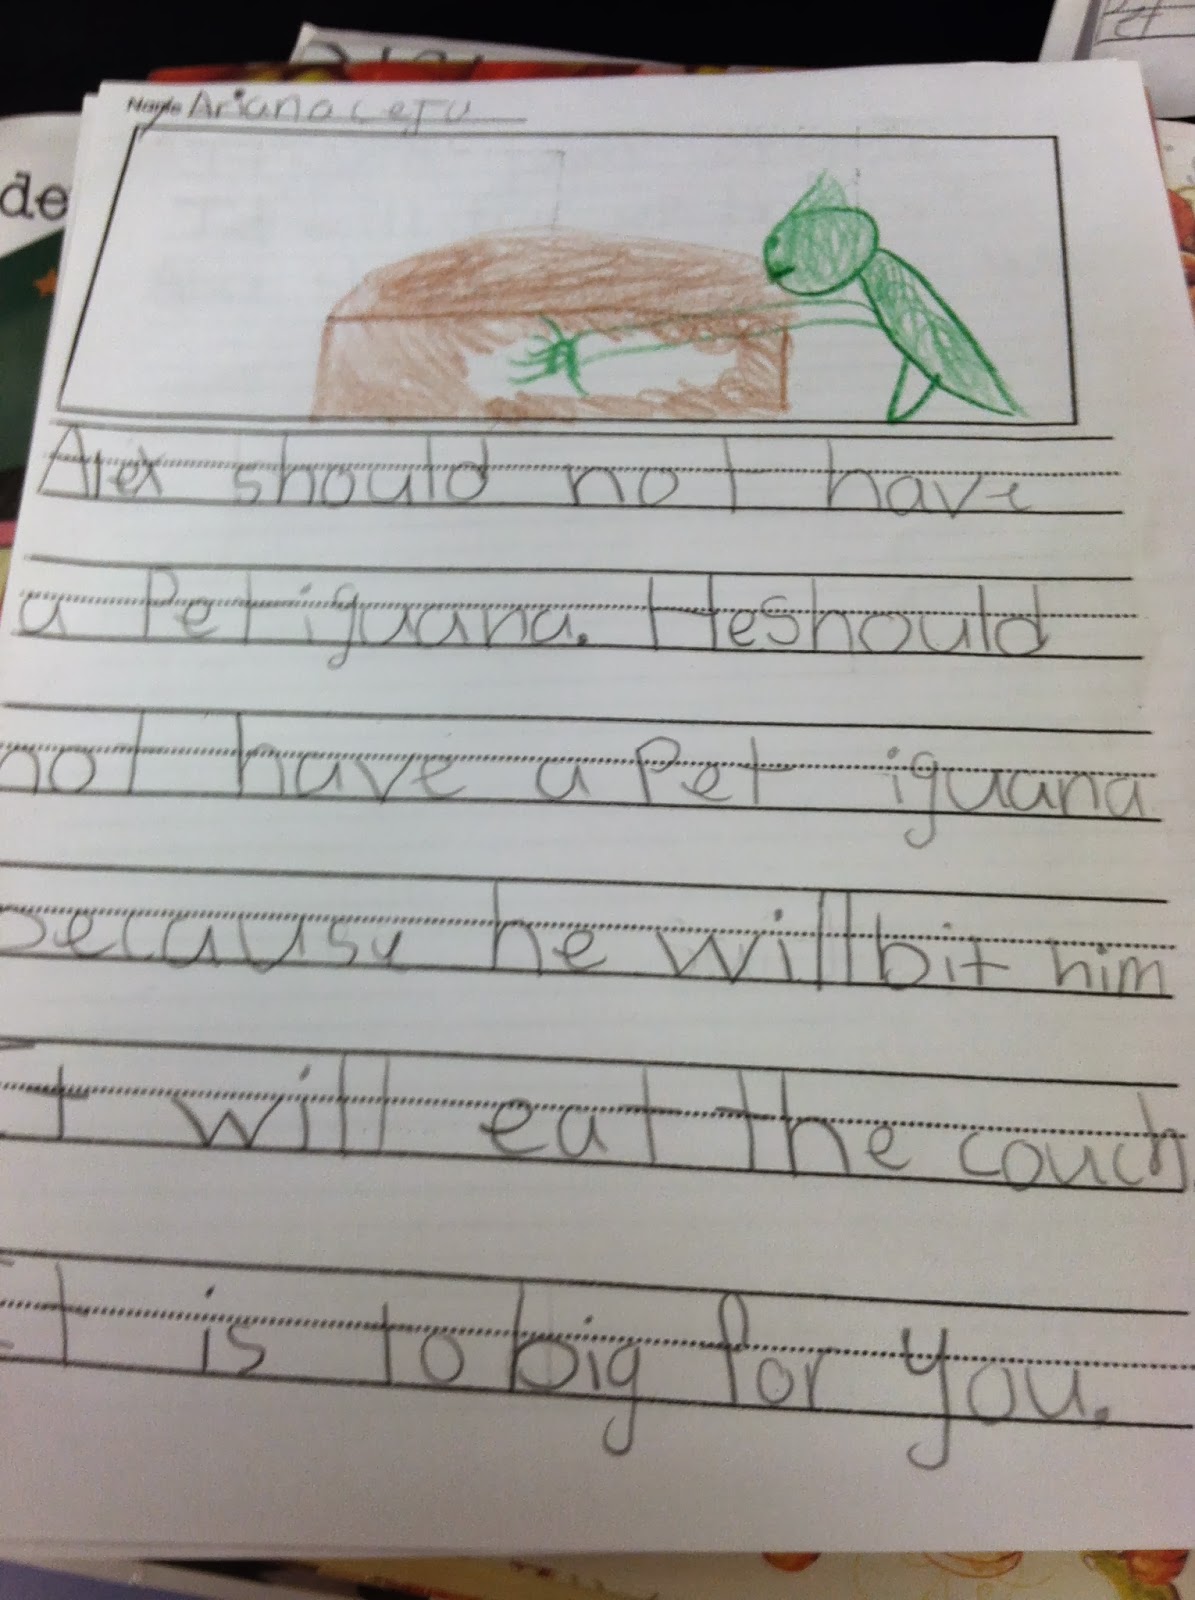 Opinion writing in 1st grade